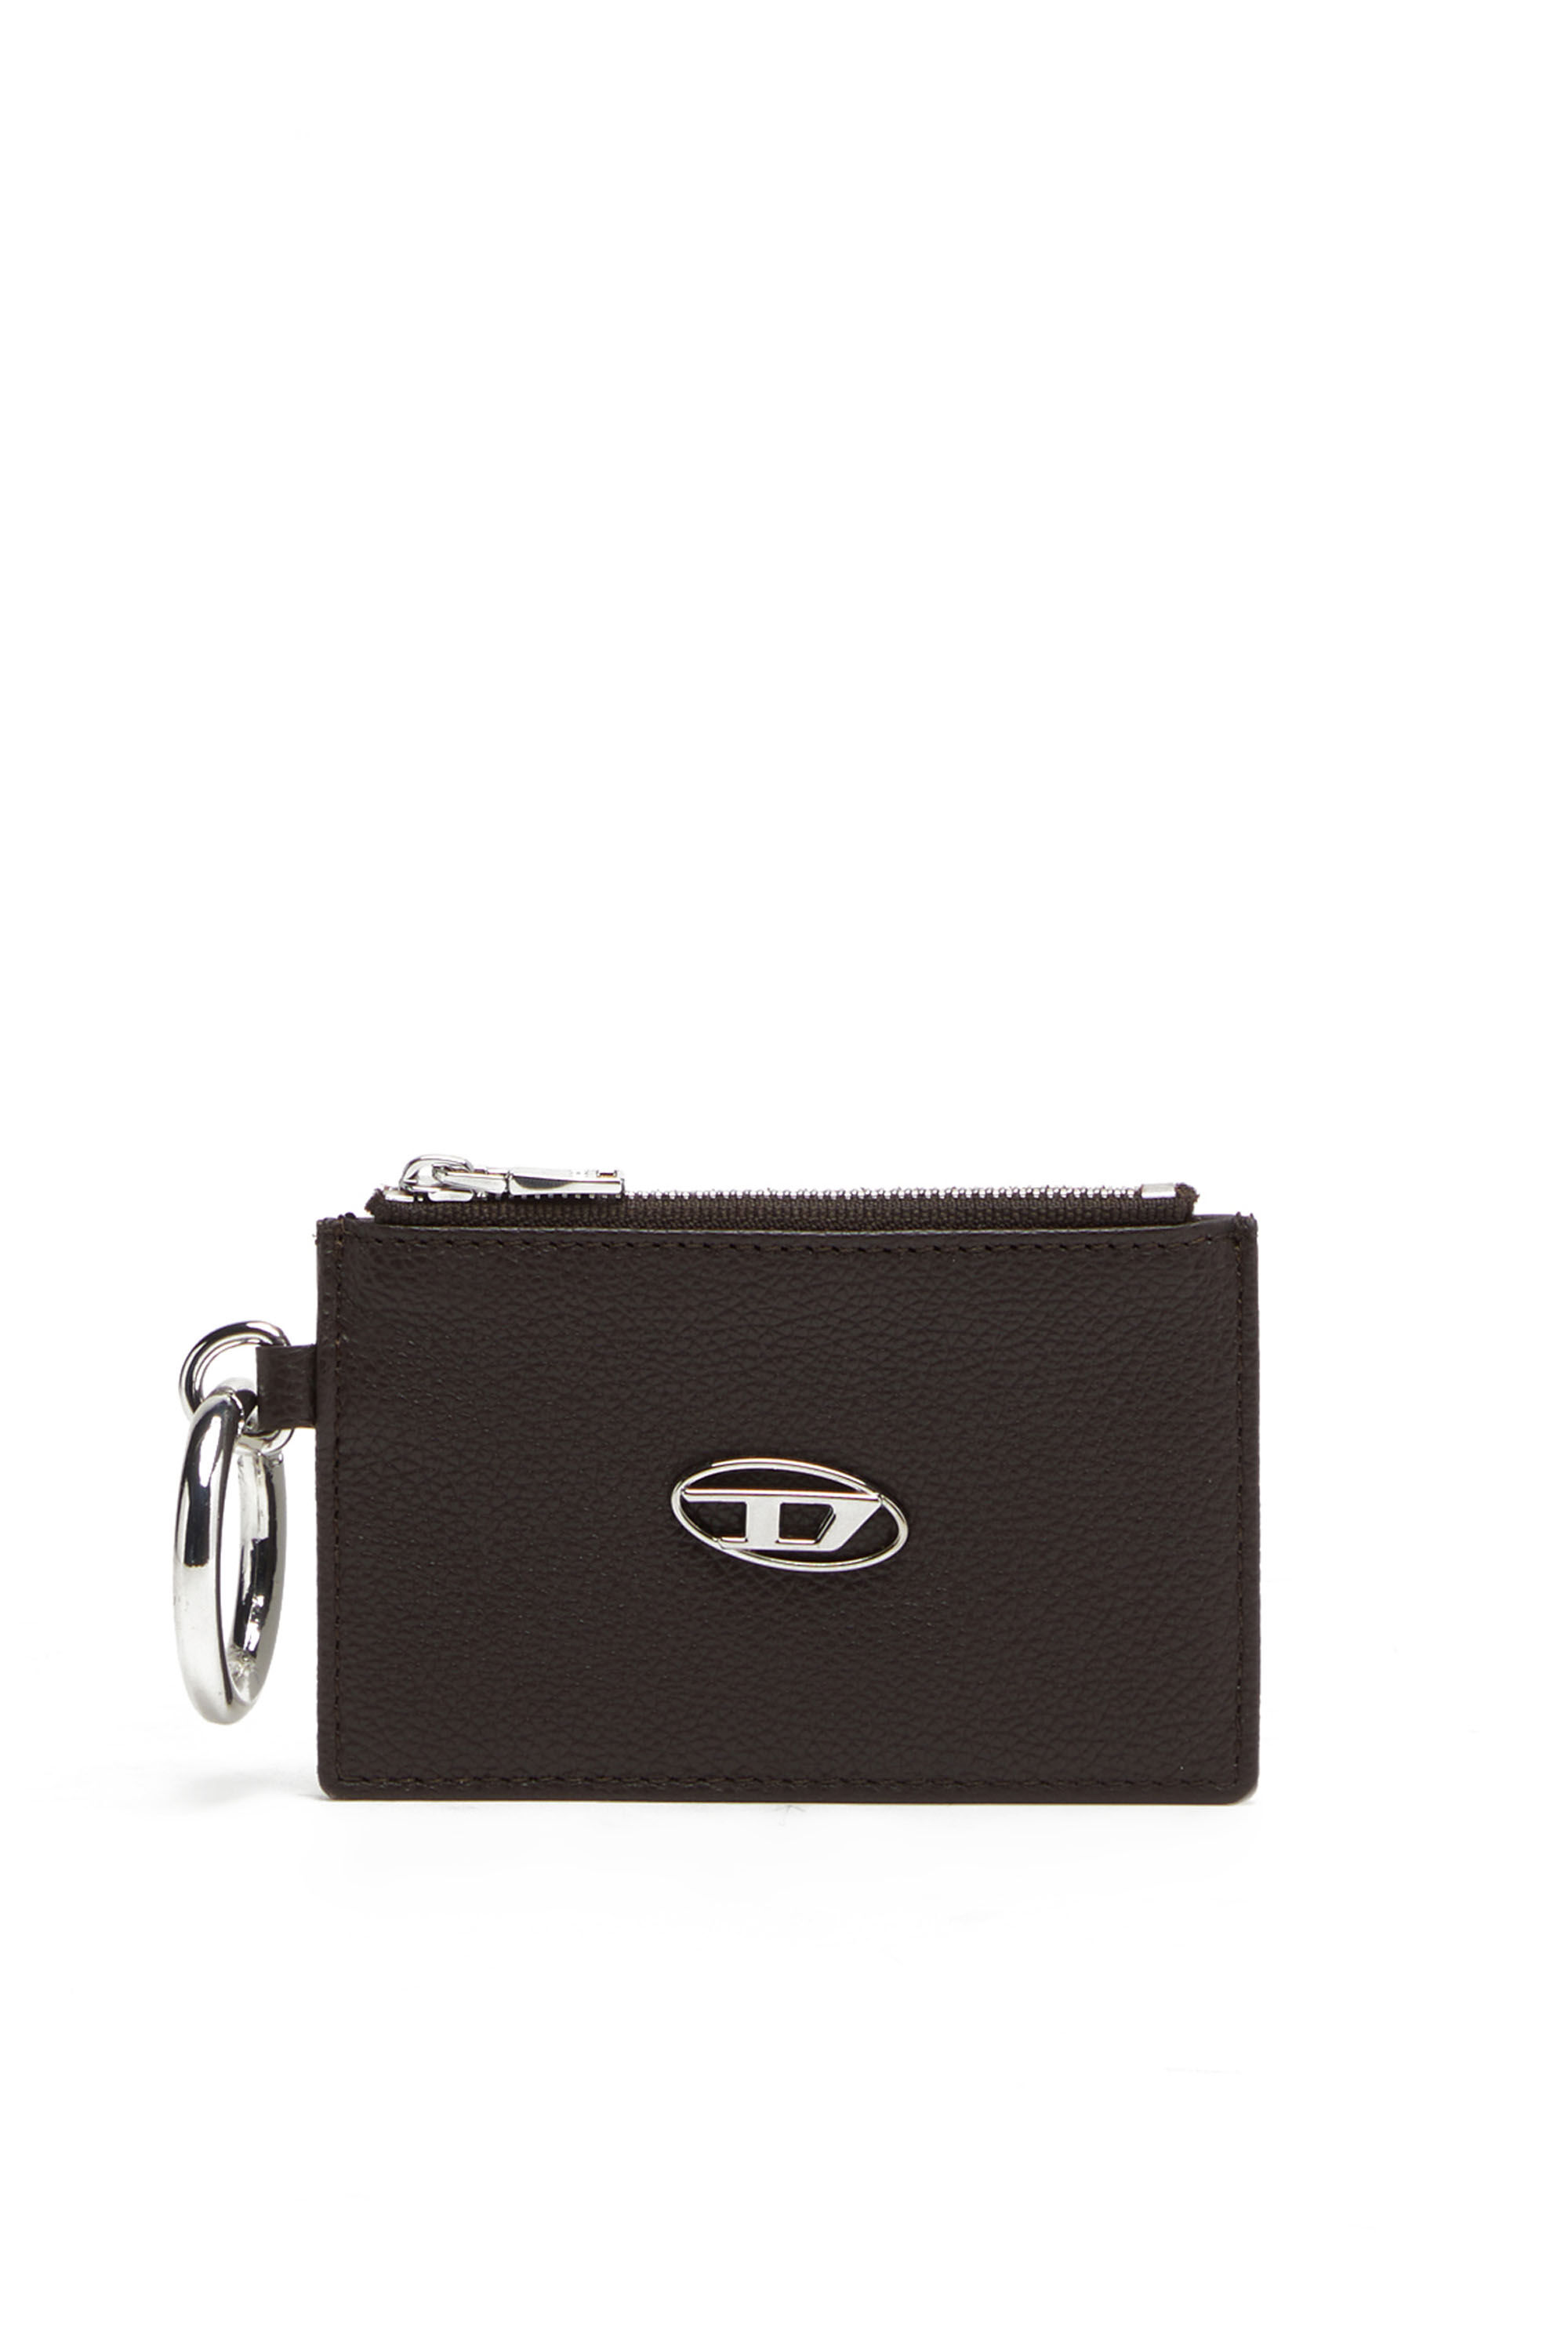 Diesel - CARD POUCH, Unisex Slim leather coin and card holder in Brown - Image 1